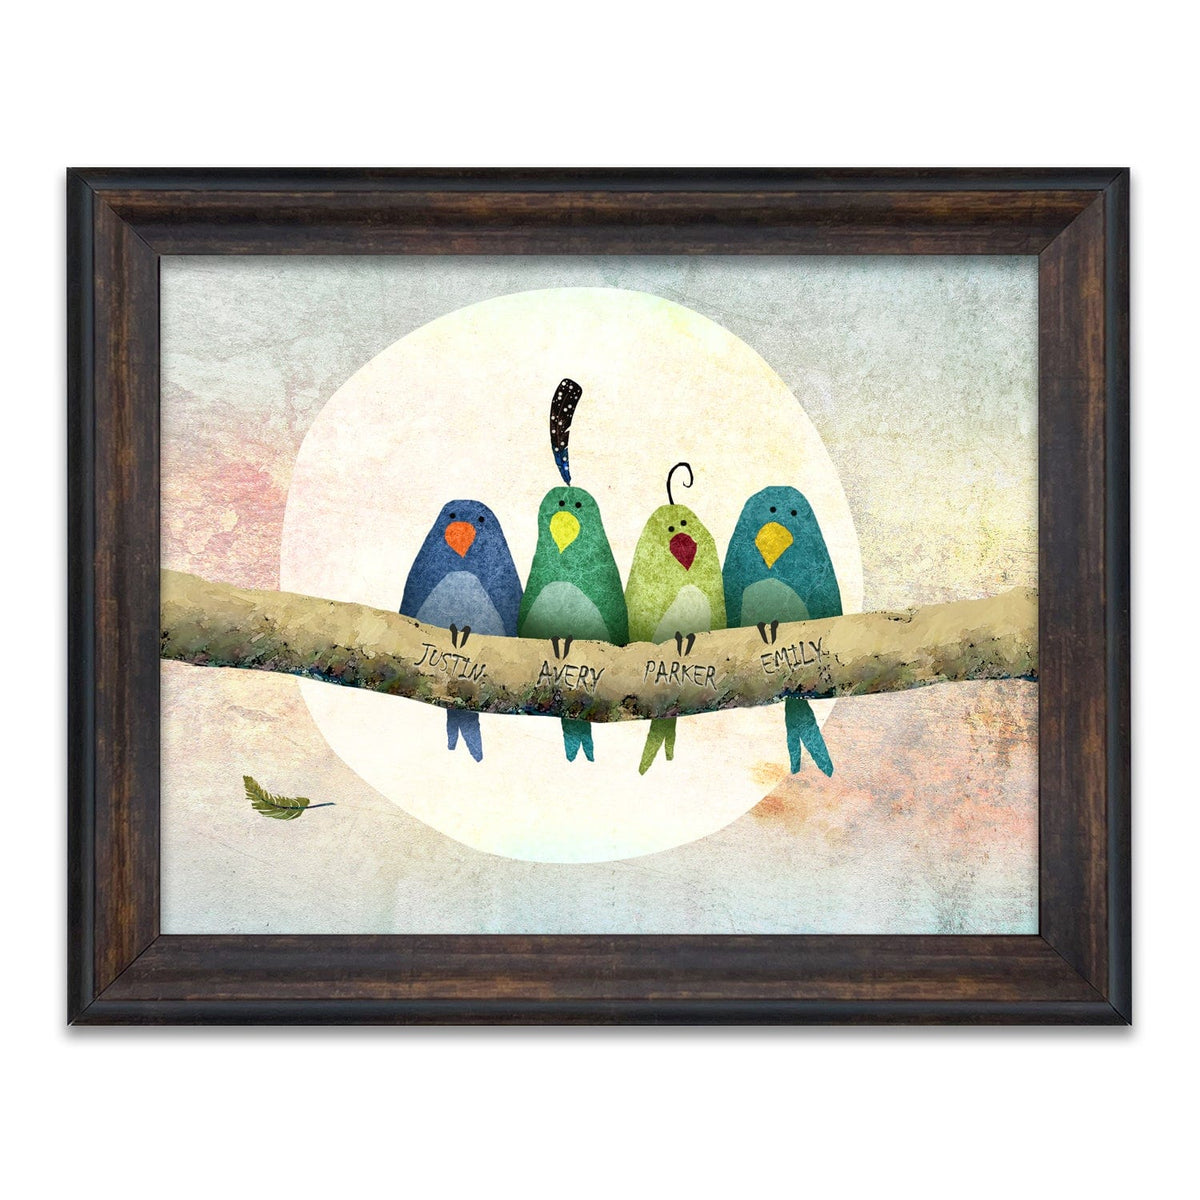 Happy Birds Personalized Gift with family member names - Framed 